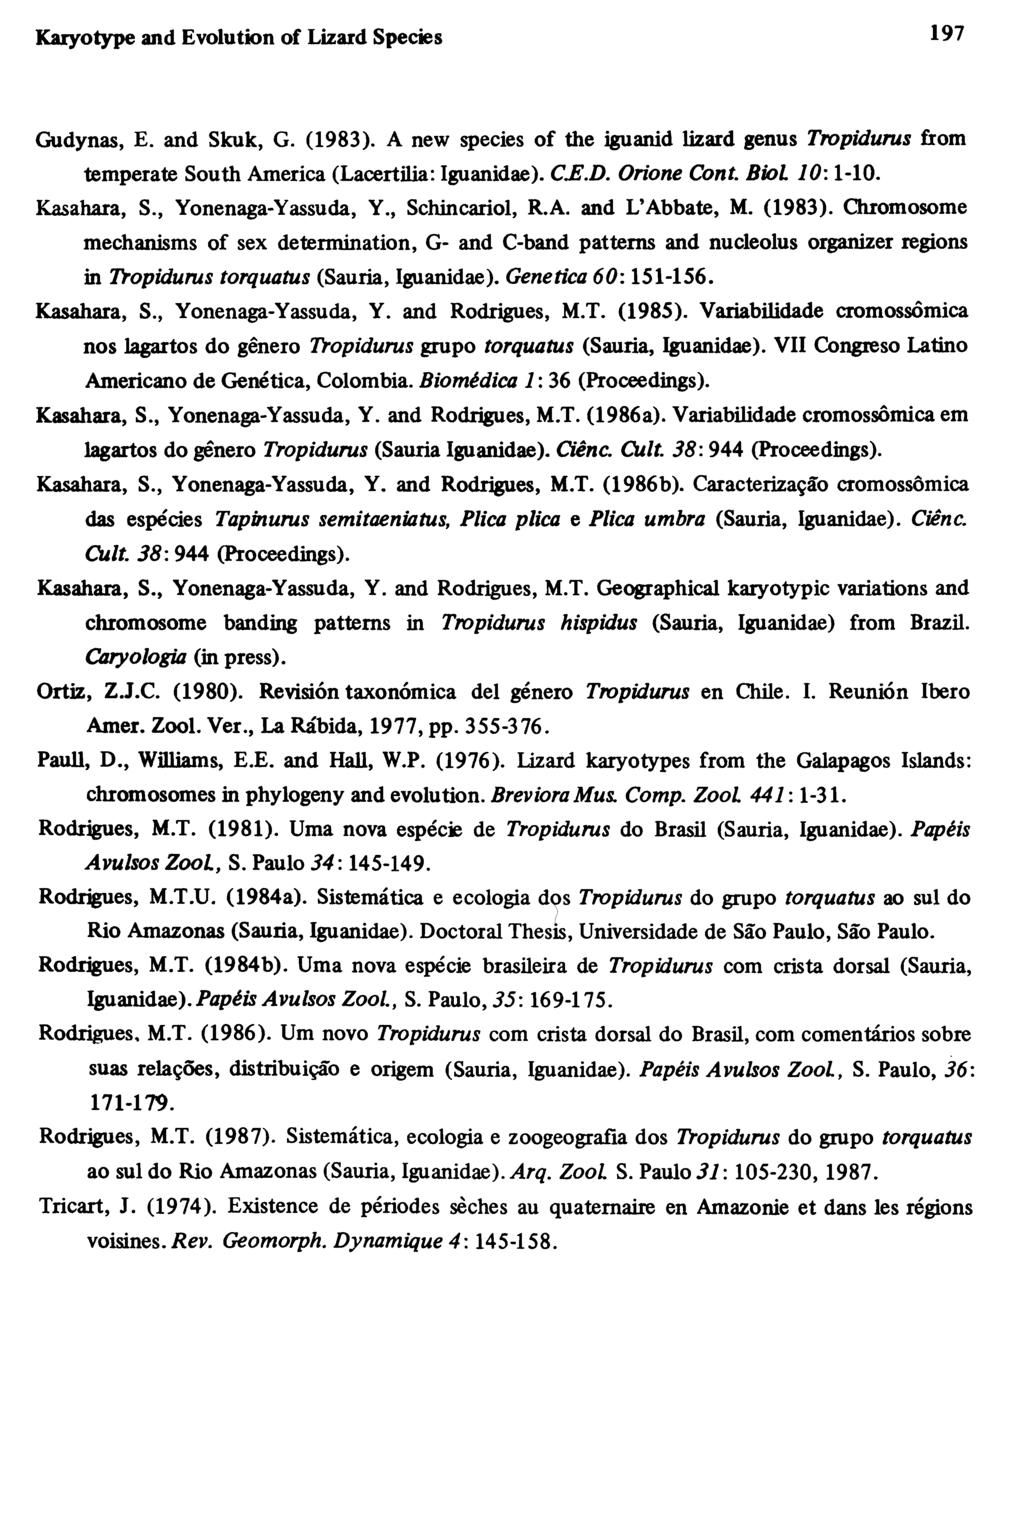 Karyotype and Evolution of Lizard Species 197 Gudynas, E. and Skuk, G. (1983). A new species of the iguanid lizard genus Tropidurus from temperate South America (Lacertilia: Iguanidae). C.E.D.